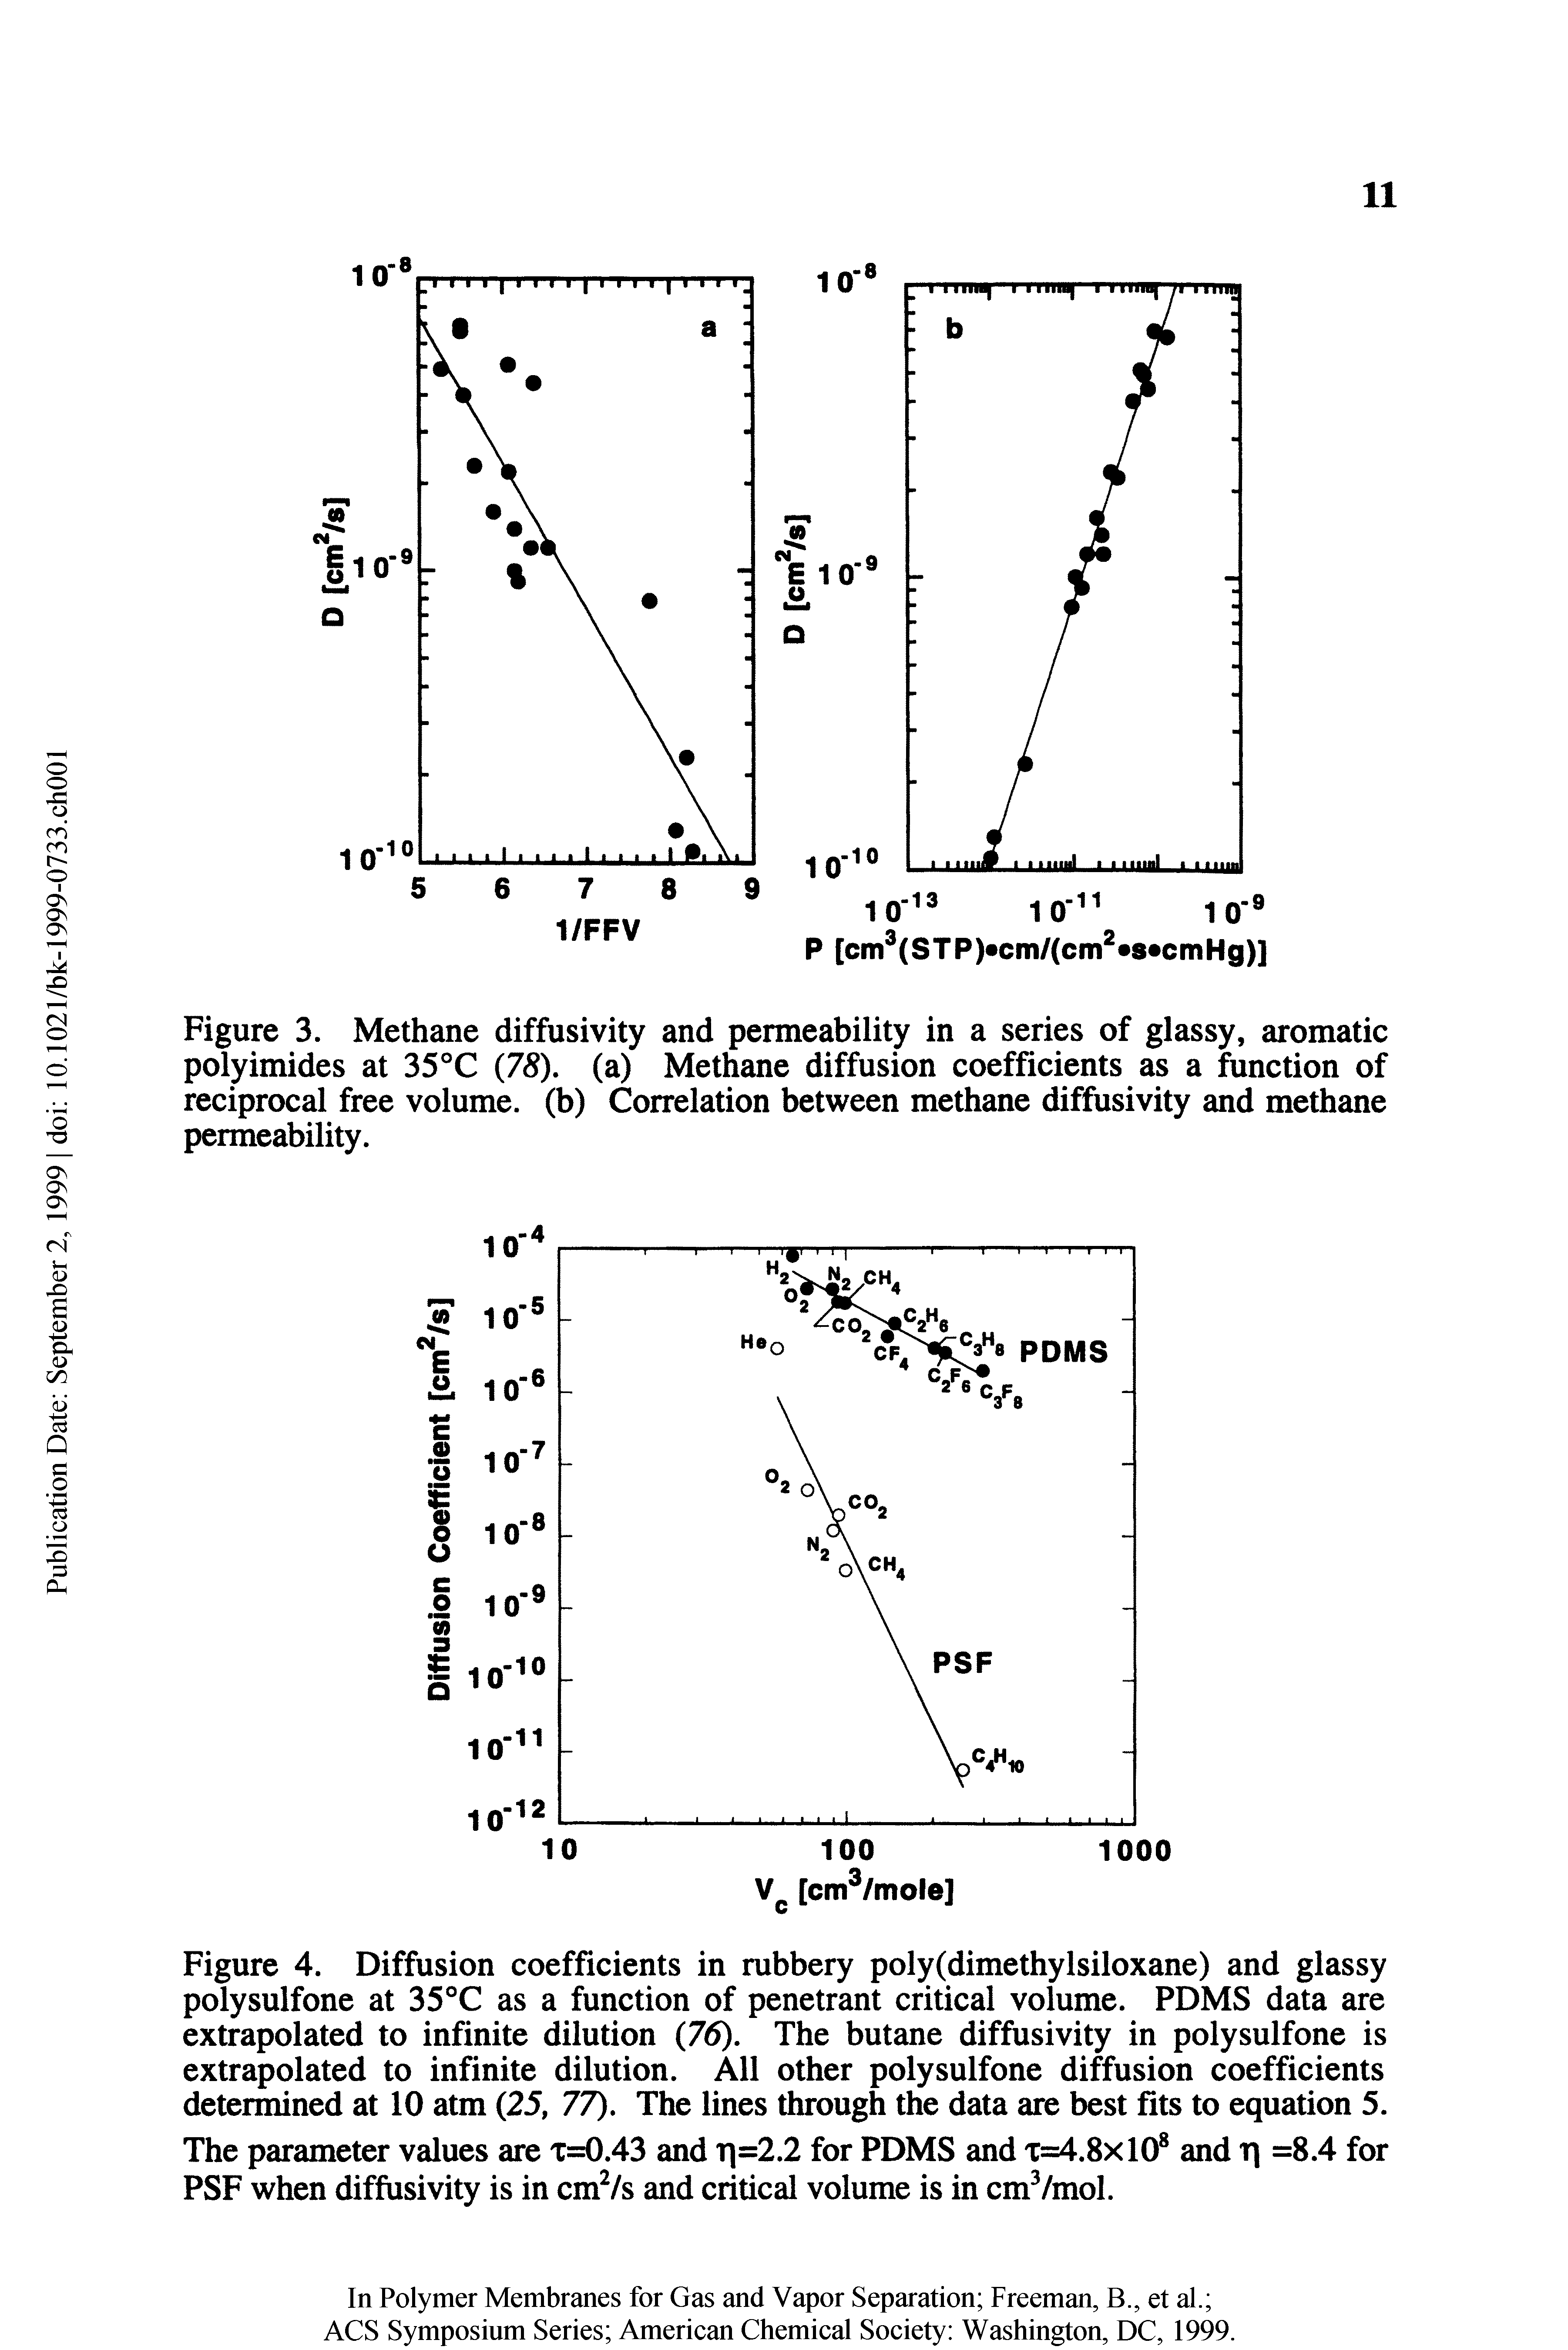 Figure 3. Methane diffusivity and permeability in a series of glassy, aromatic polyimides at 35°C (78), (a) Methane diffusion coefficients as a function of reciprocal free volume, (b) Correlation between methane diffusivity and methane permeability.